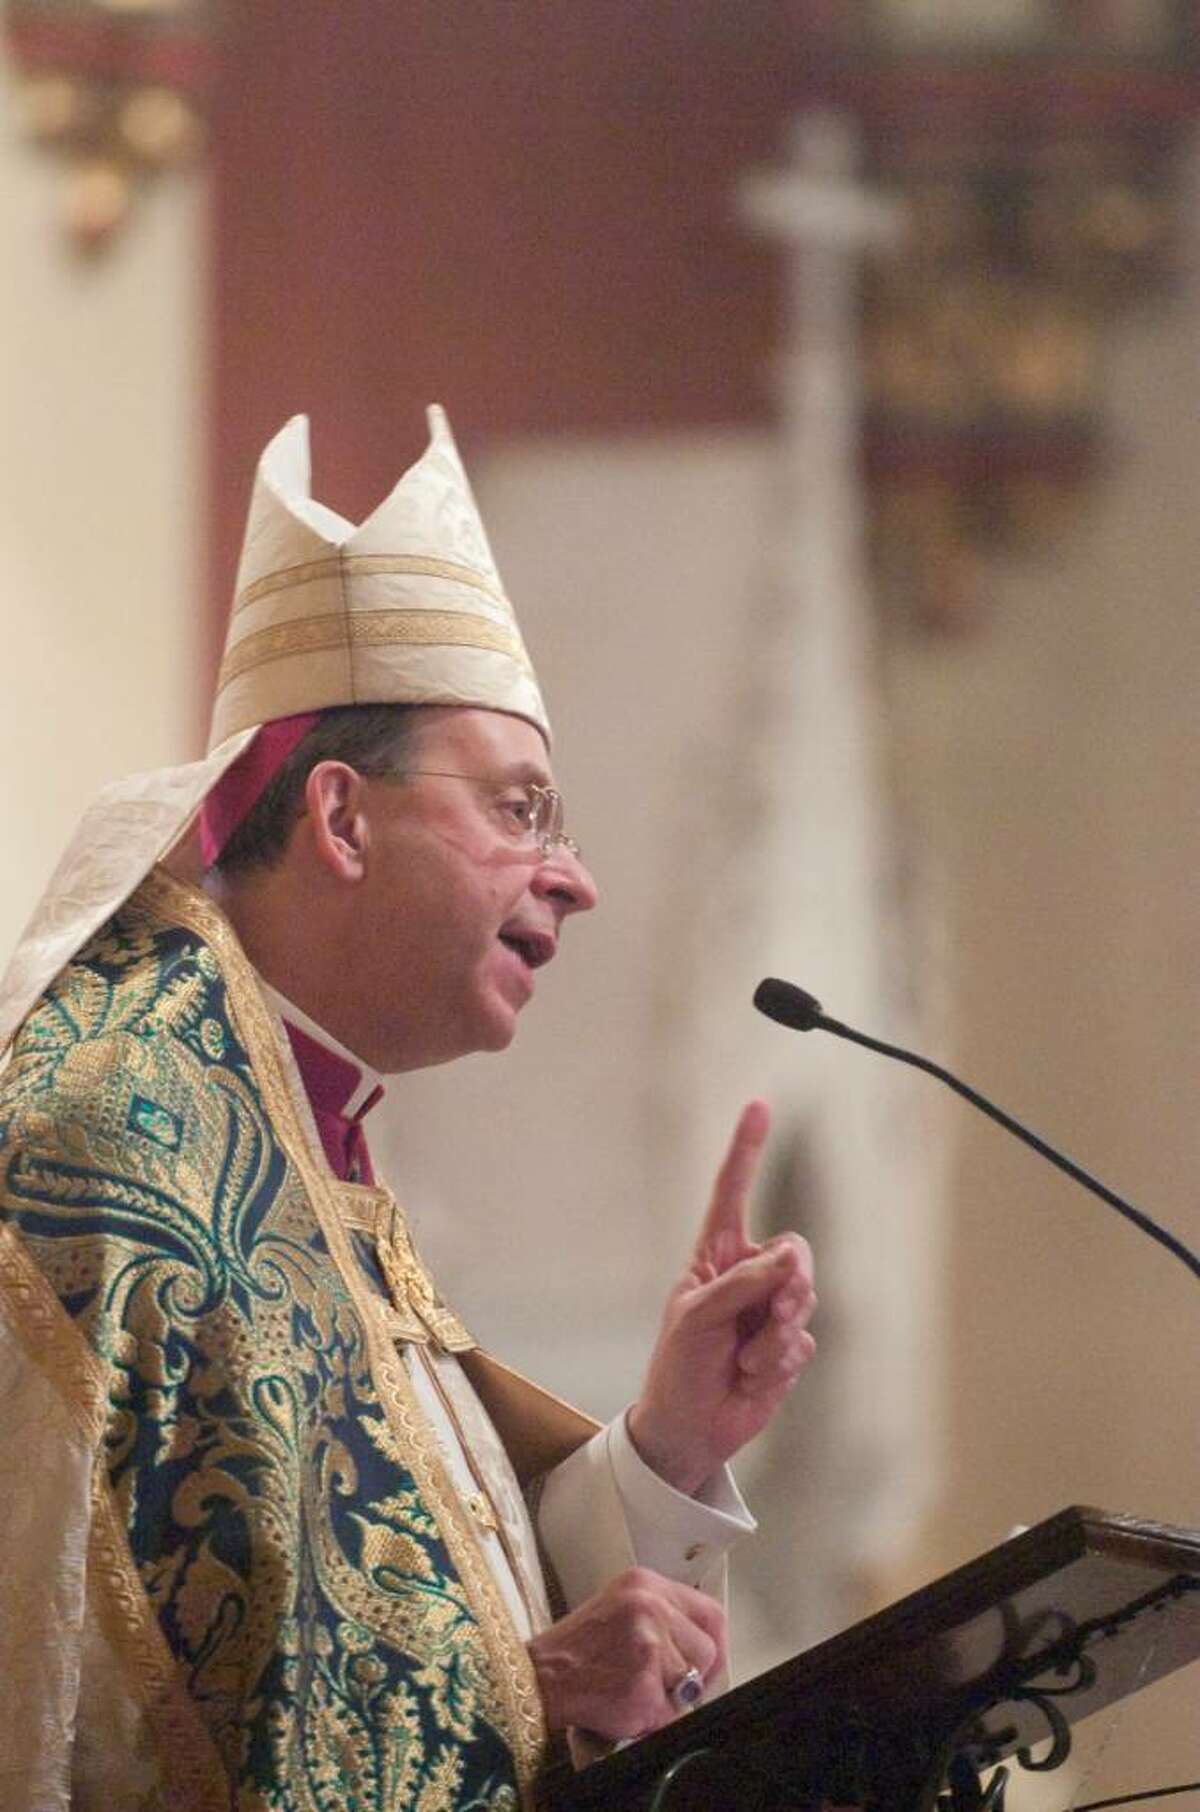 Bishop William E. Lori speaks during the inauguration ceremonies for the Basilica of St. John the Evangelist in downtown Stamford, Conn. on Monday, Feb. 22, 2010. The church was officially designated by Pope Benedict XVI as a minor basilica, making it the second minor basilica in the state after the Basilica of the Immaculate Conception in Waterbury.